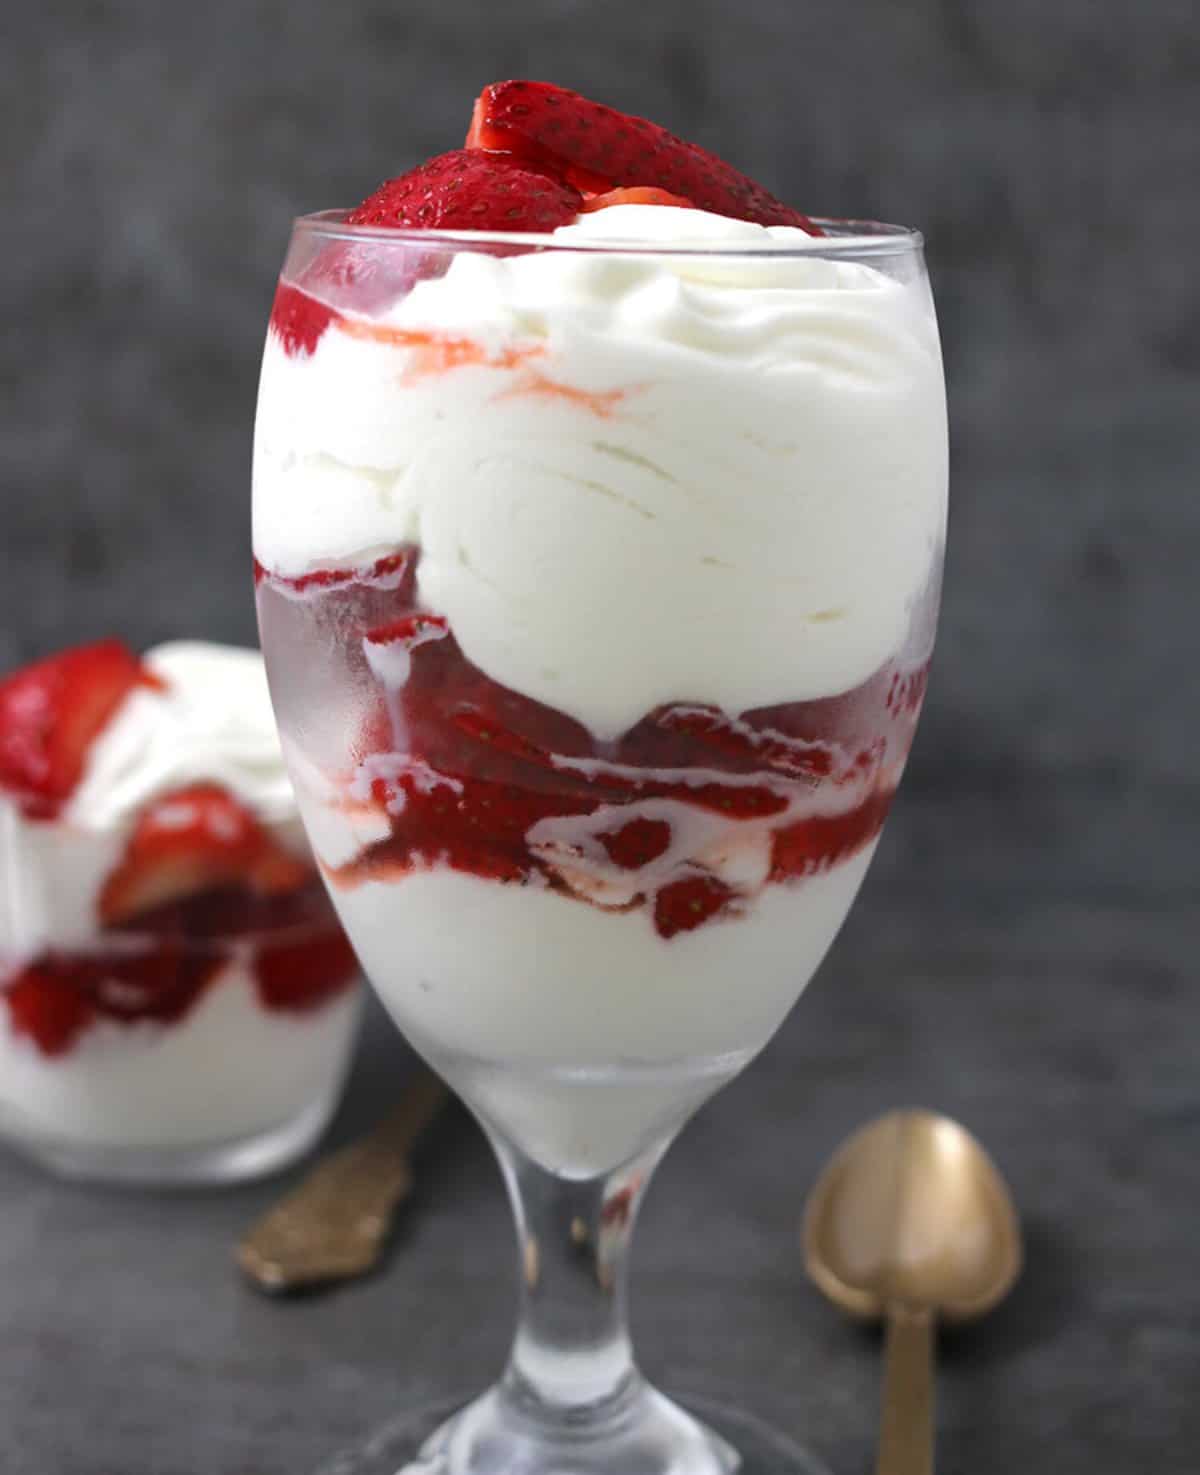 Best Mexican Fresas con Crema served in a tall dessert glass.